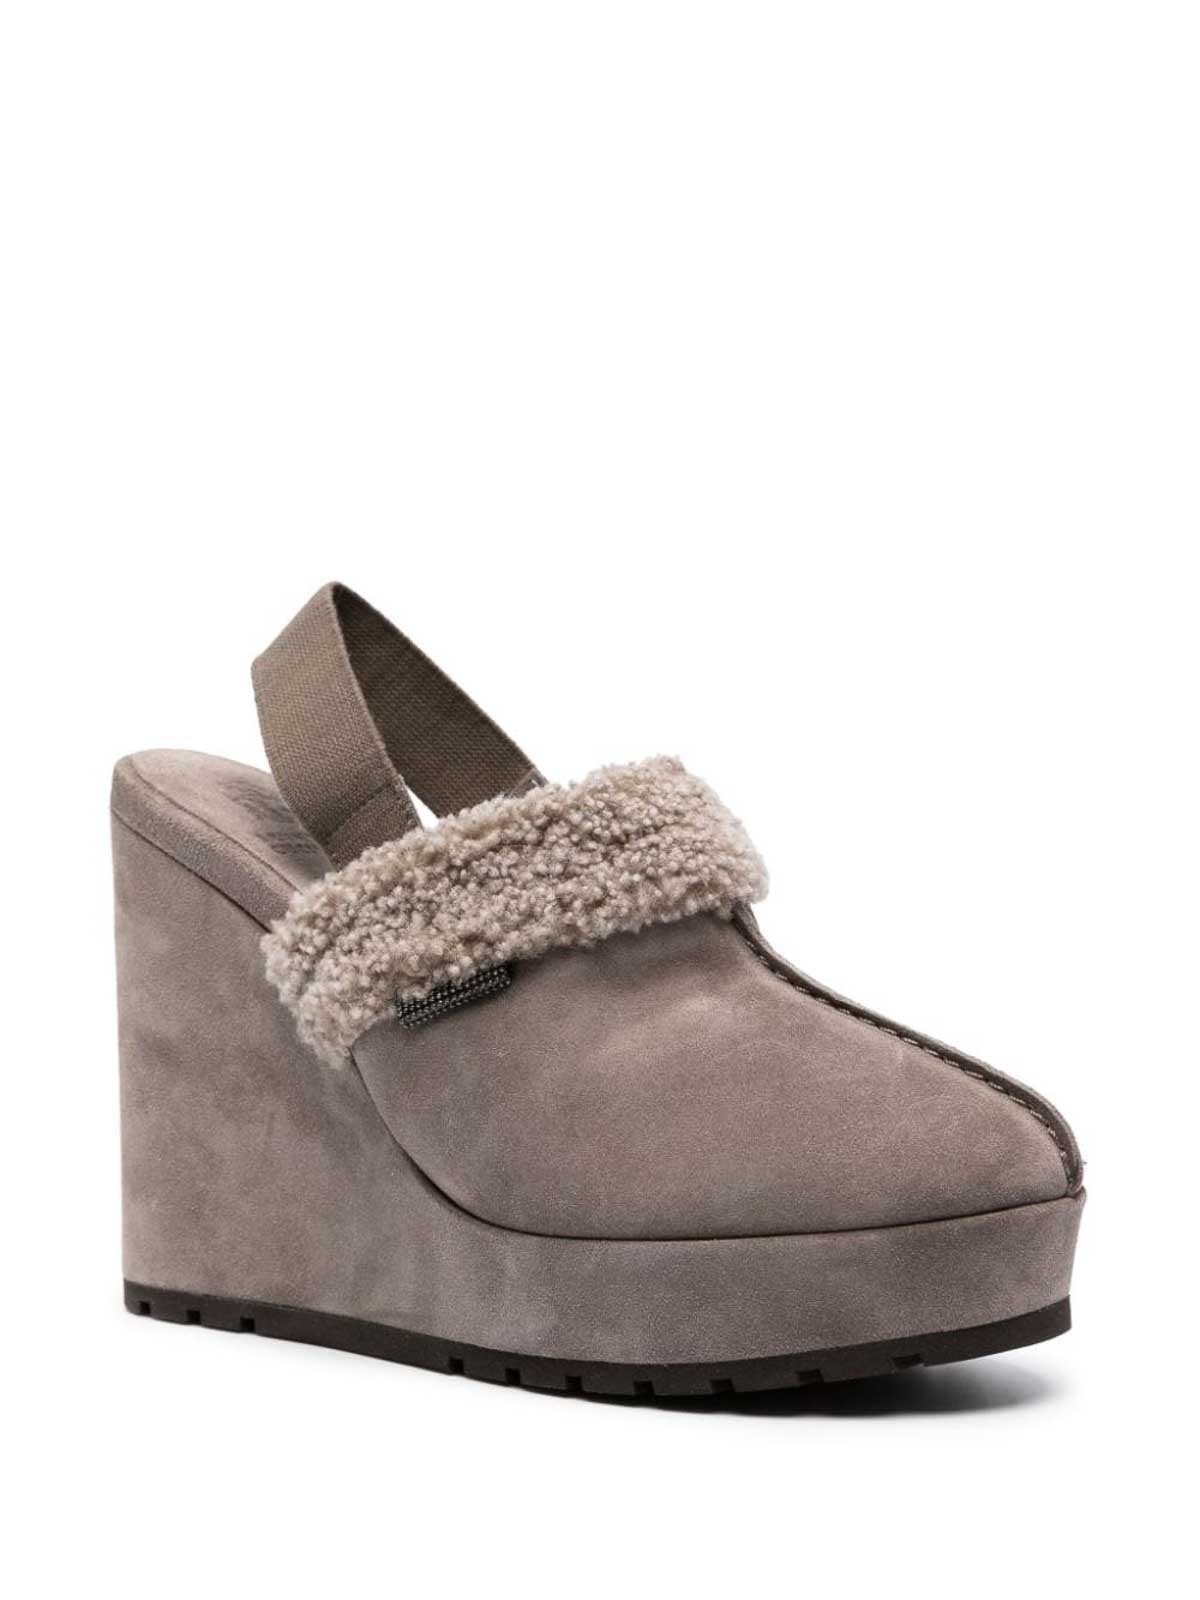 Zucca Shearling Slippers Size 37